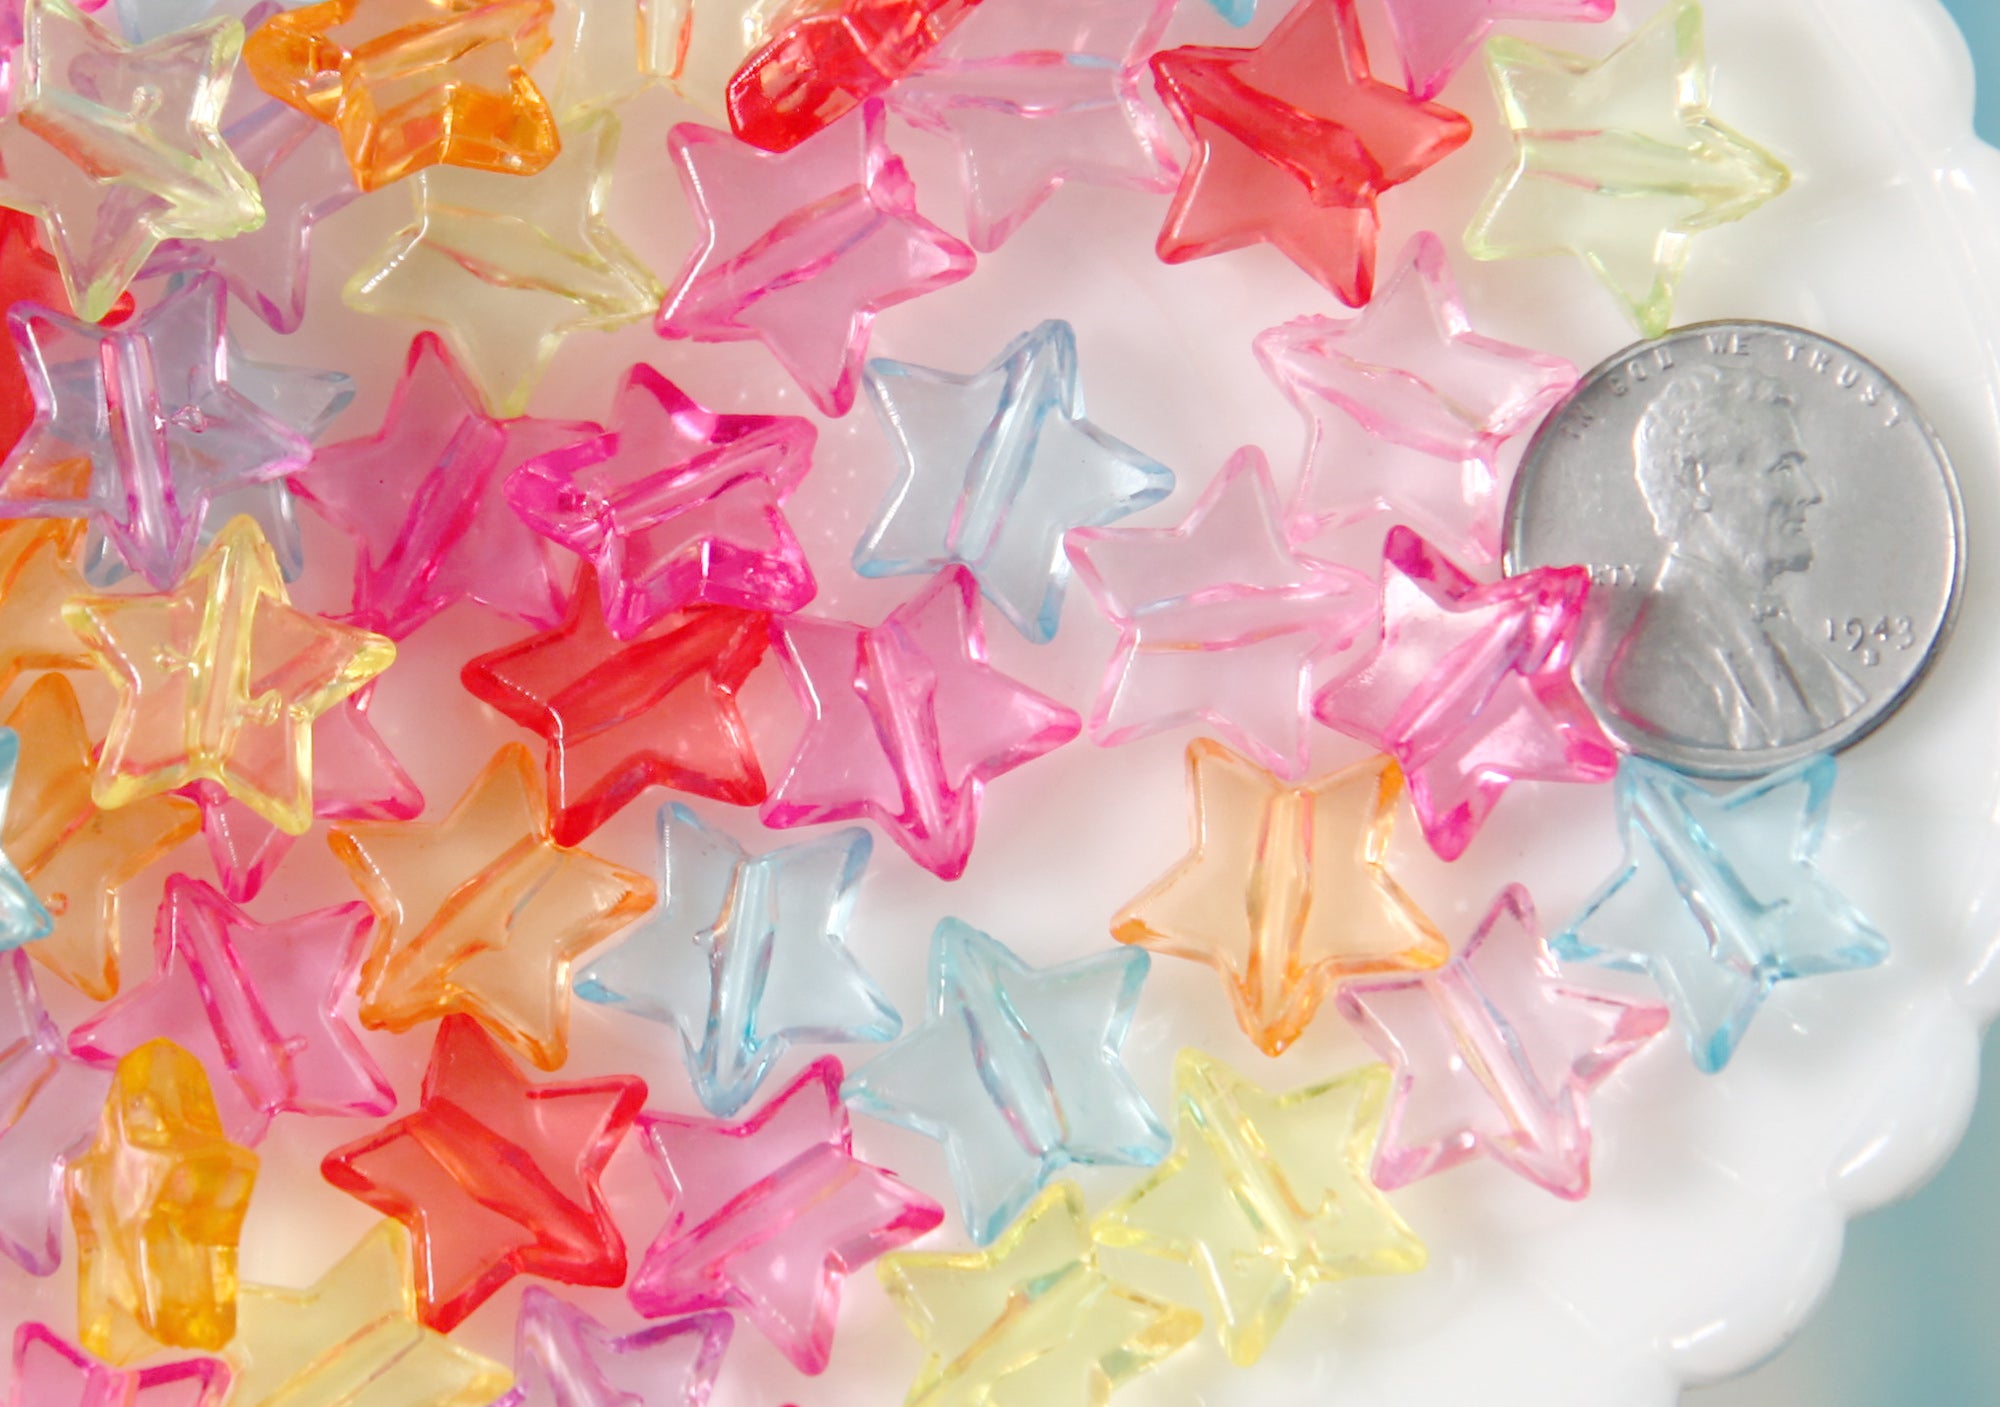 Transparent Star Beads - 14mm Colorful Transparent Star Acrylic or Res